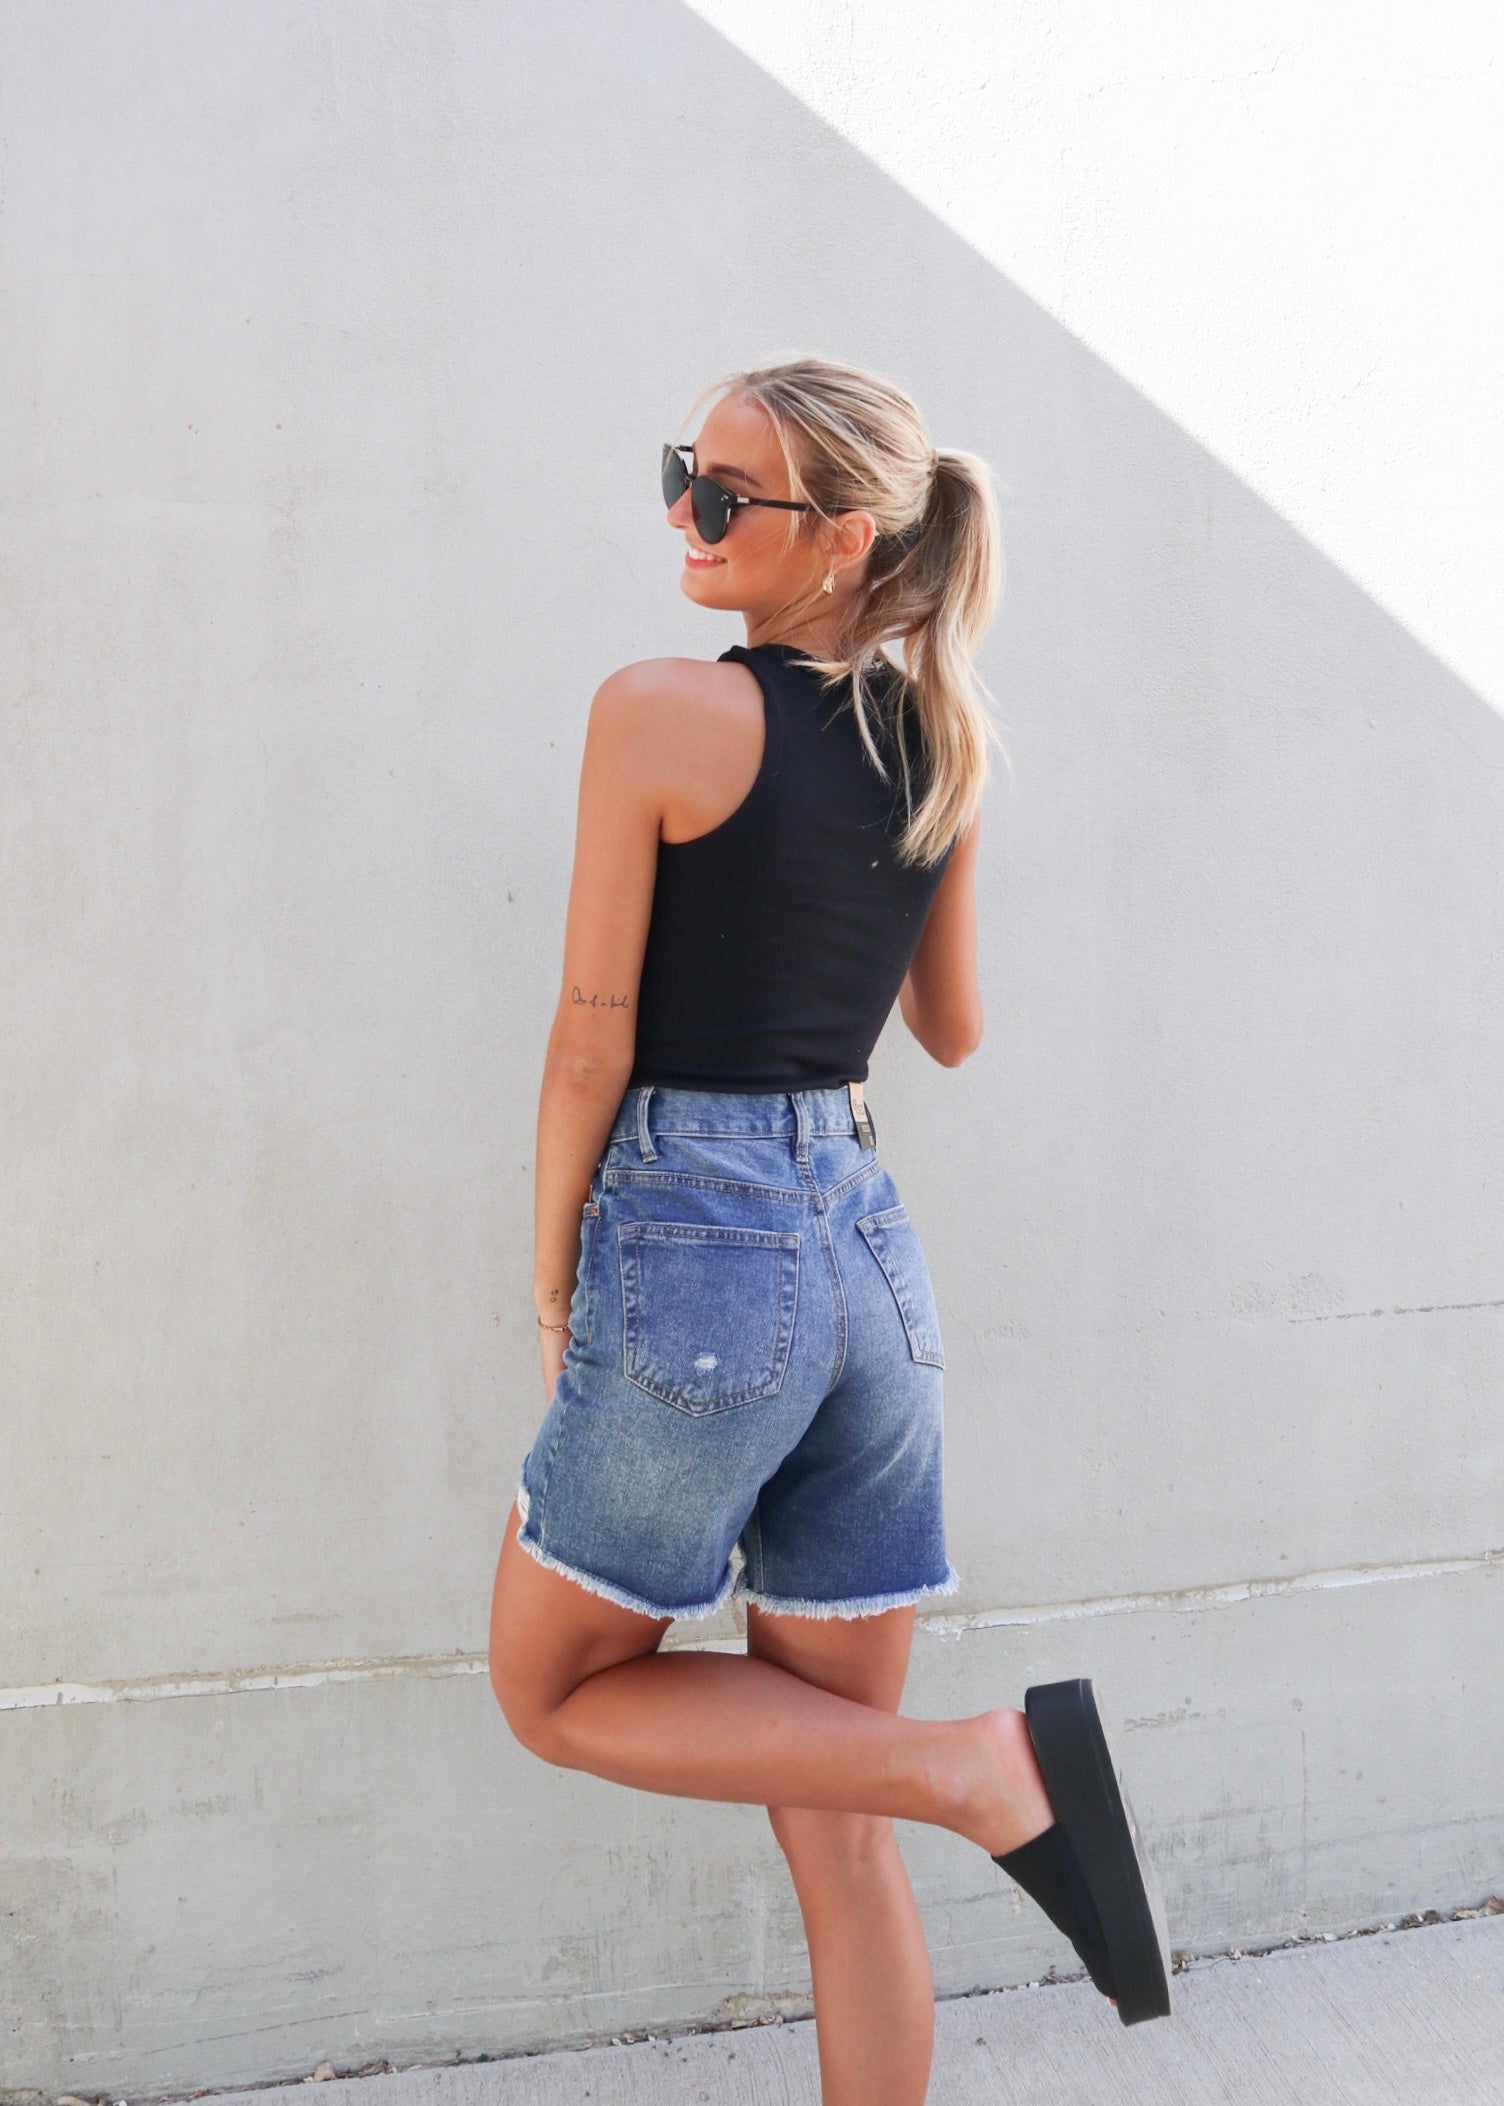 Black Denim Shorts Outfits For Women (50 ideas & outfits)